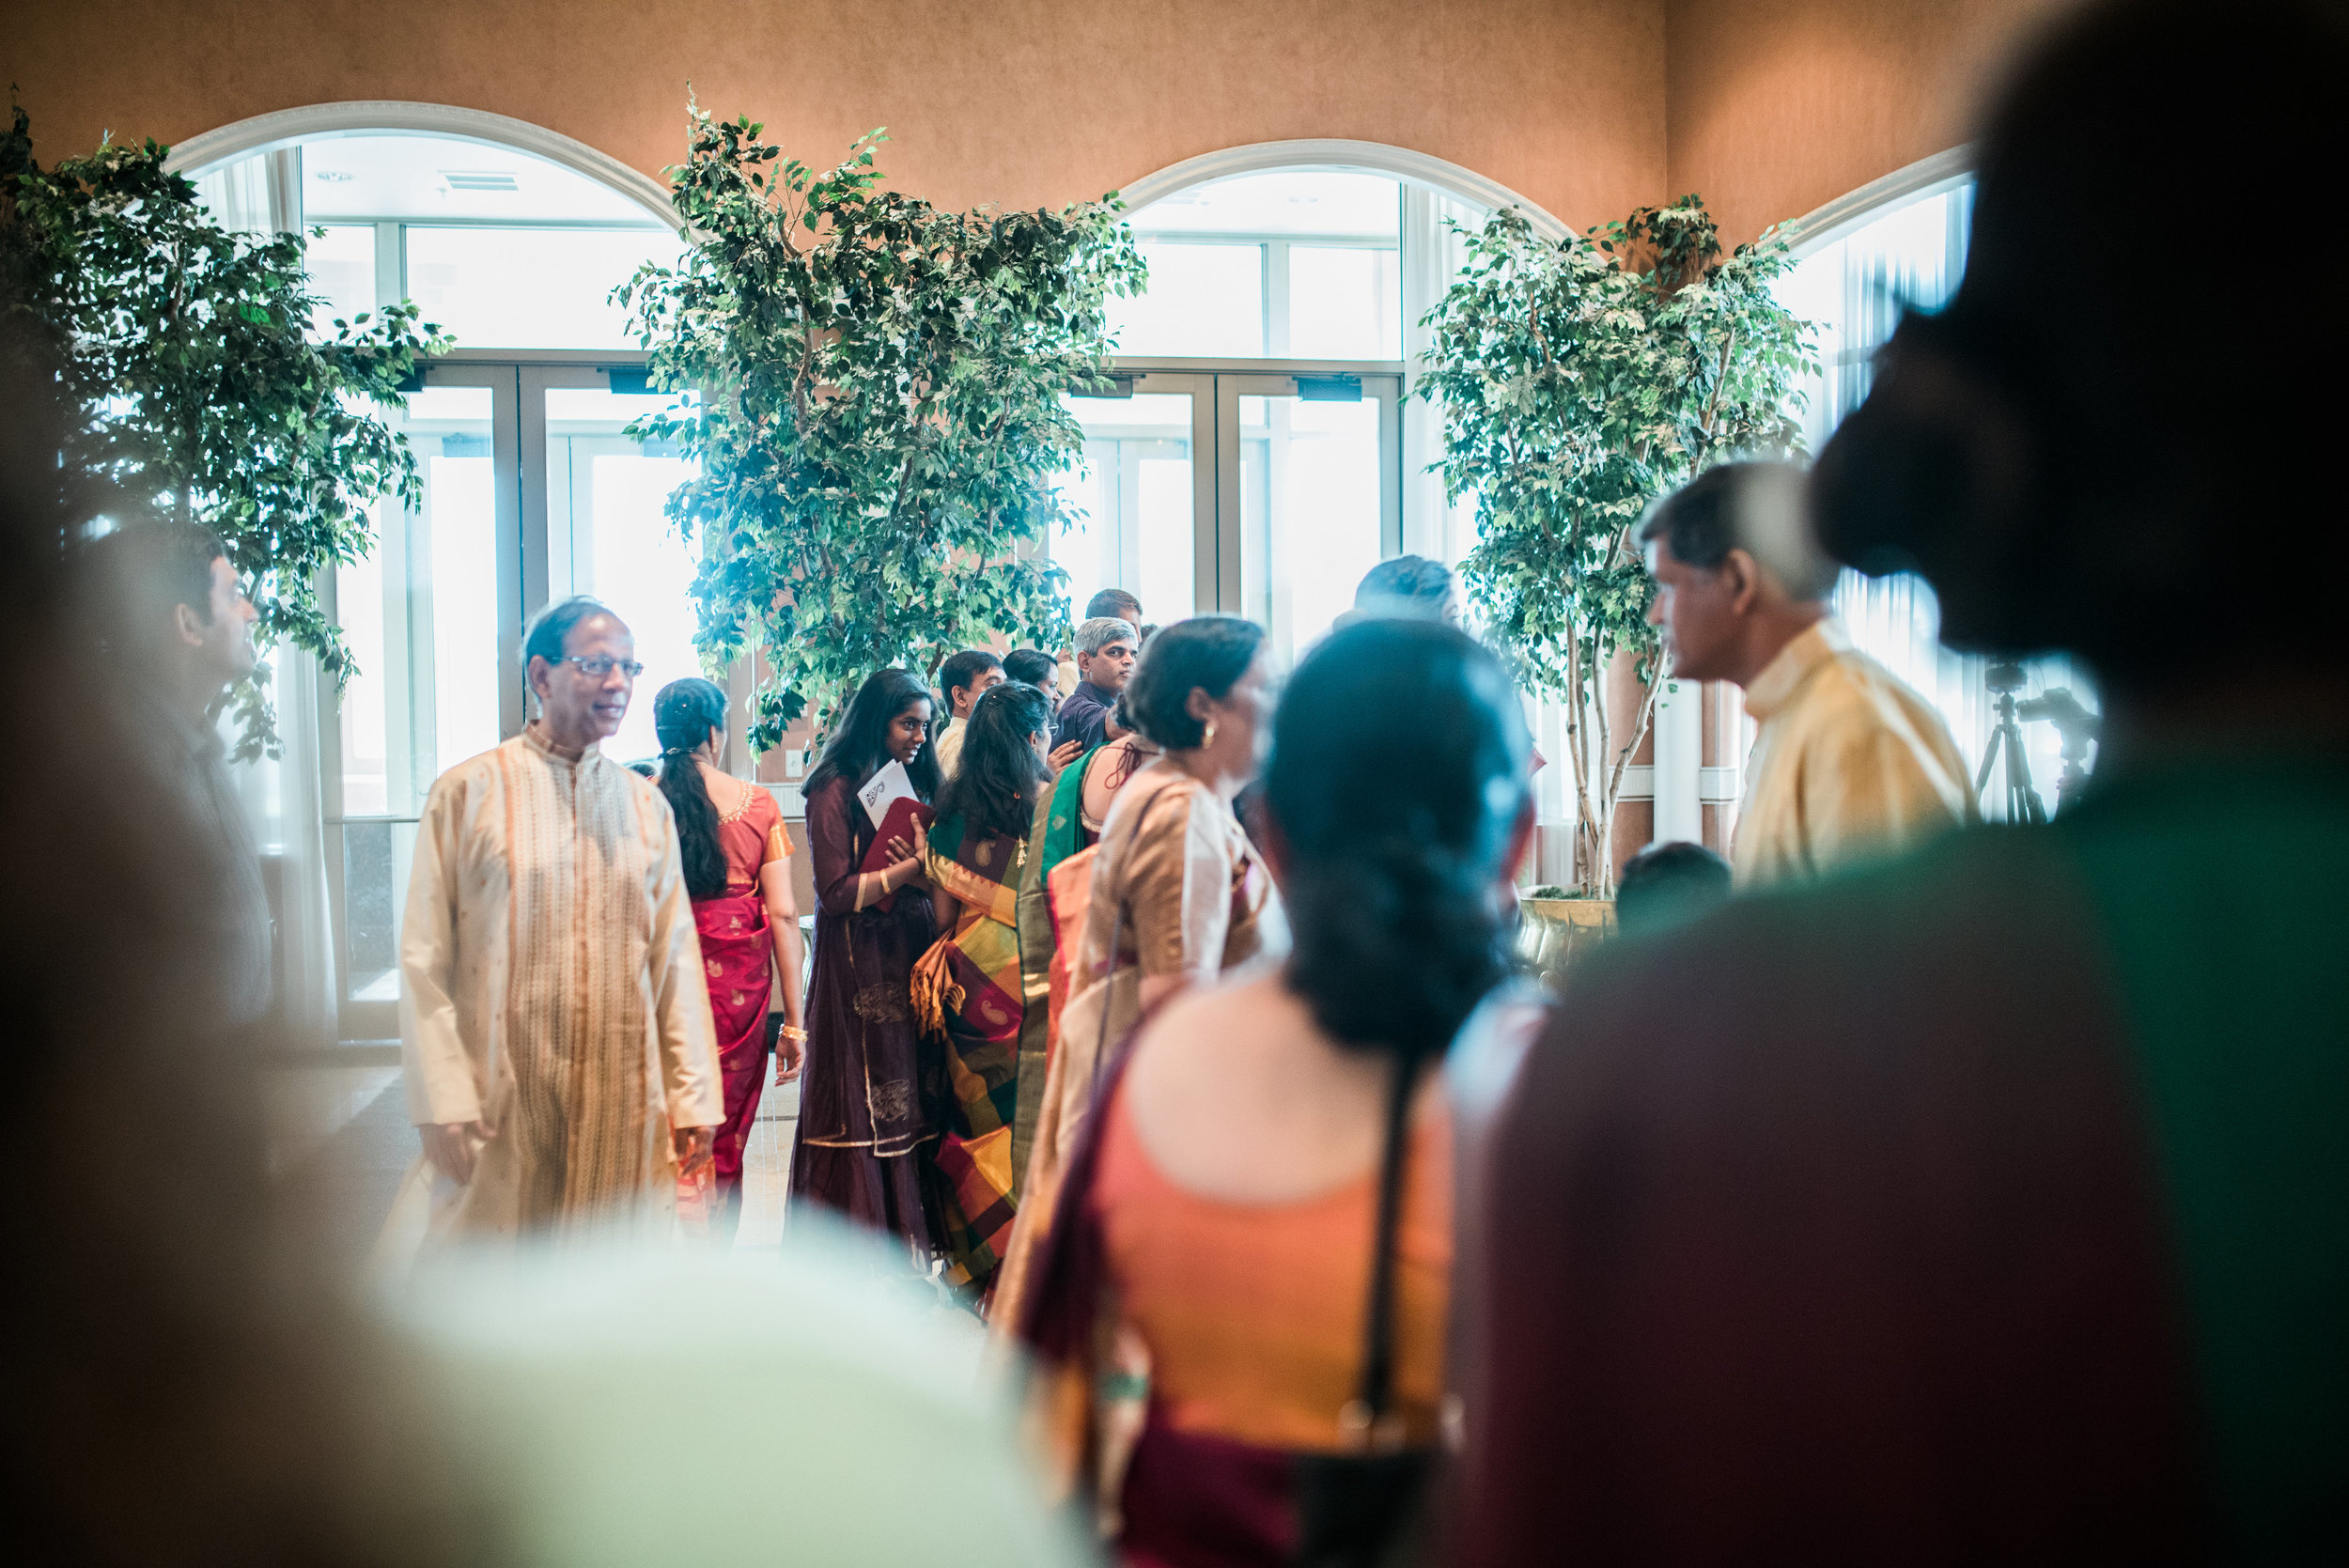  I was a guest at my cousin's wedding, and captured a few behind the scenes photos. The photographer they hired did an excellent job, and it was nice to talk shop during a break in the action! 